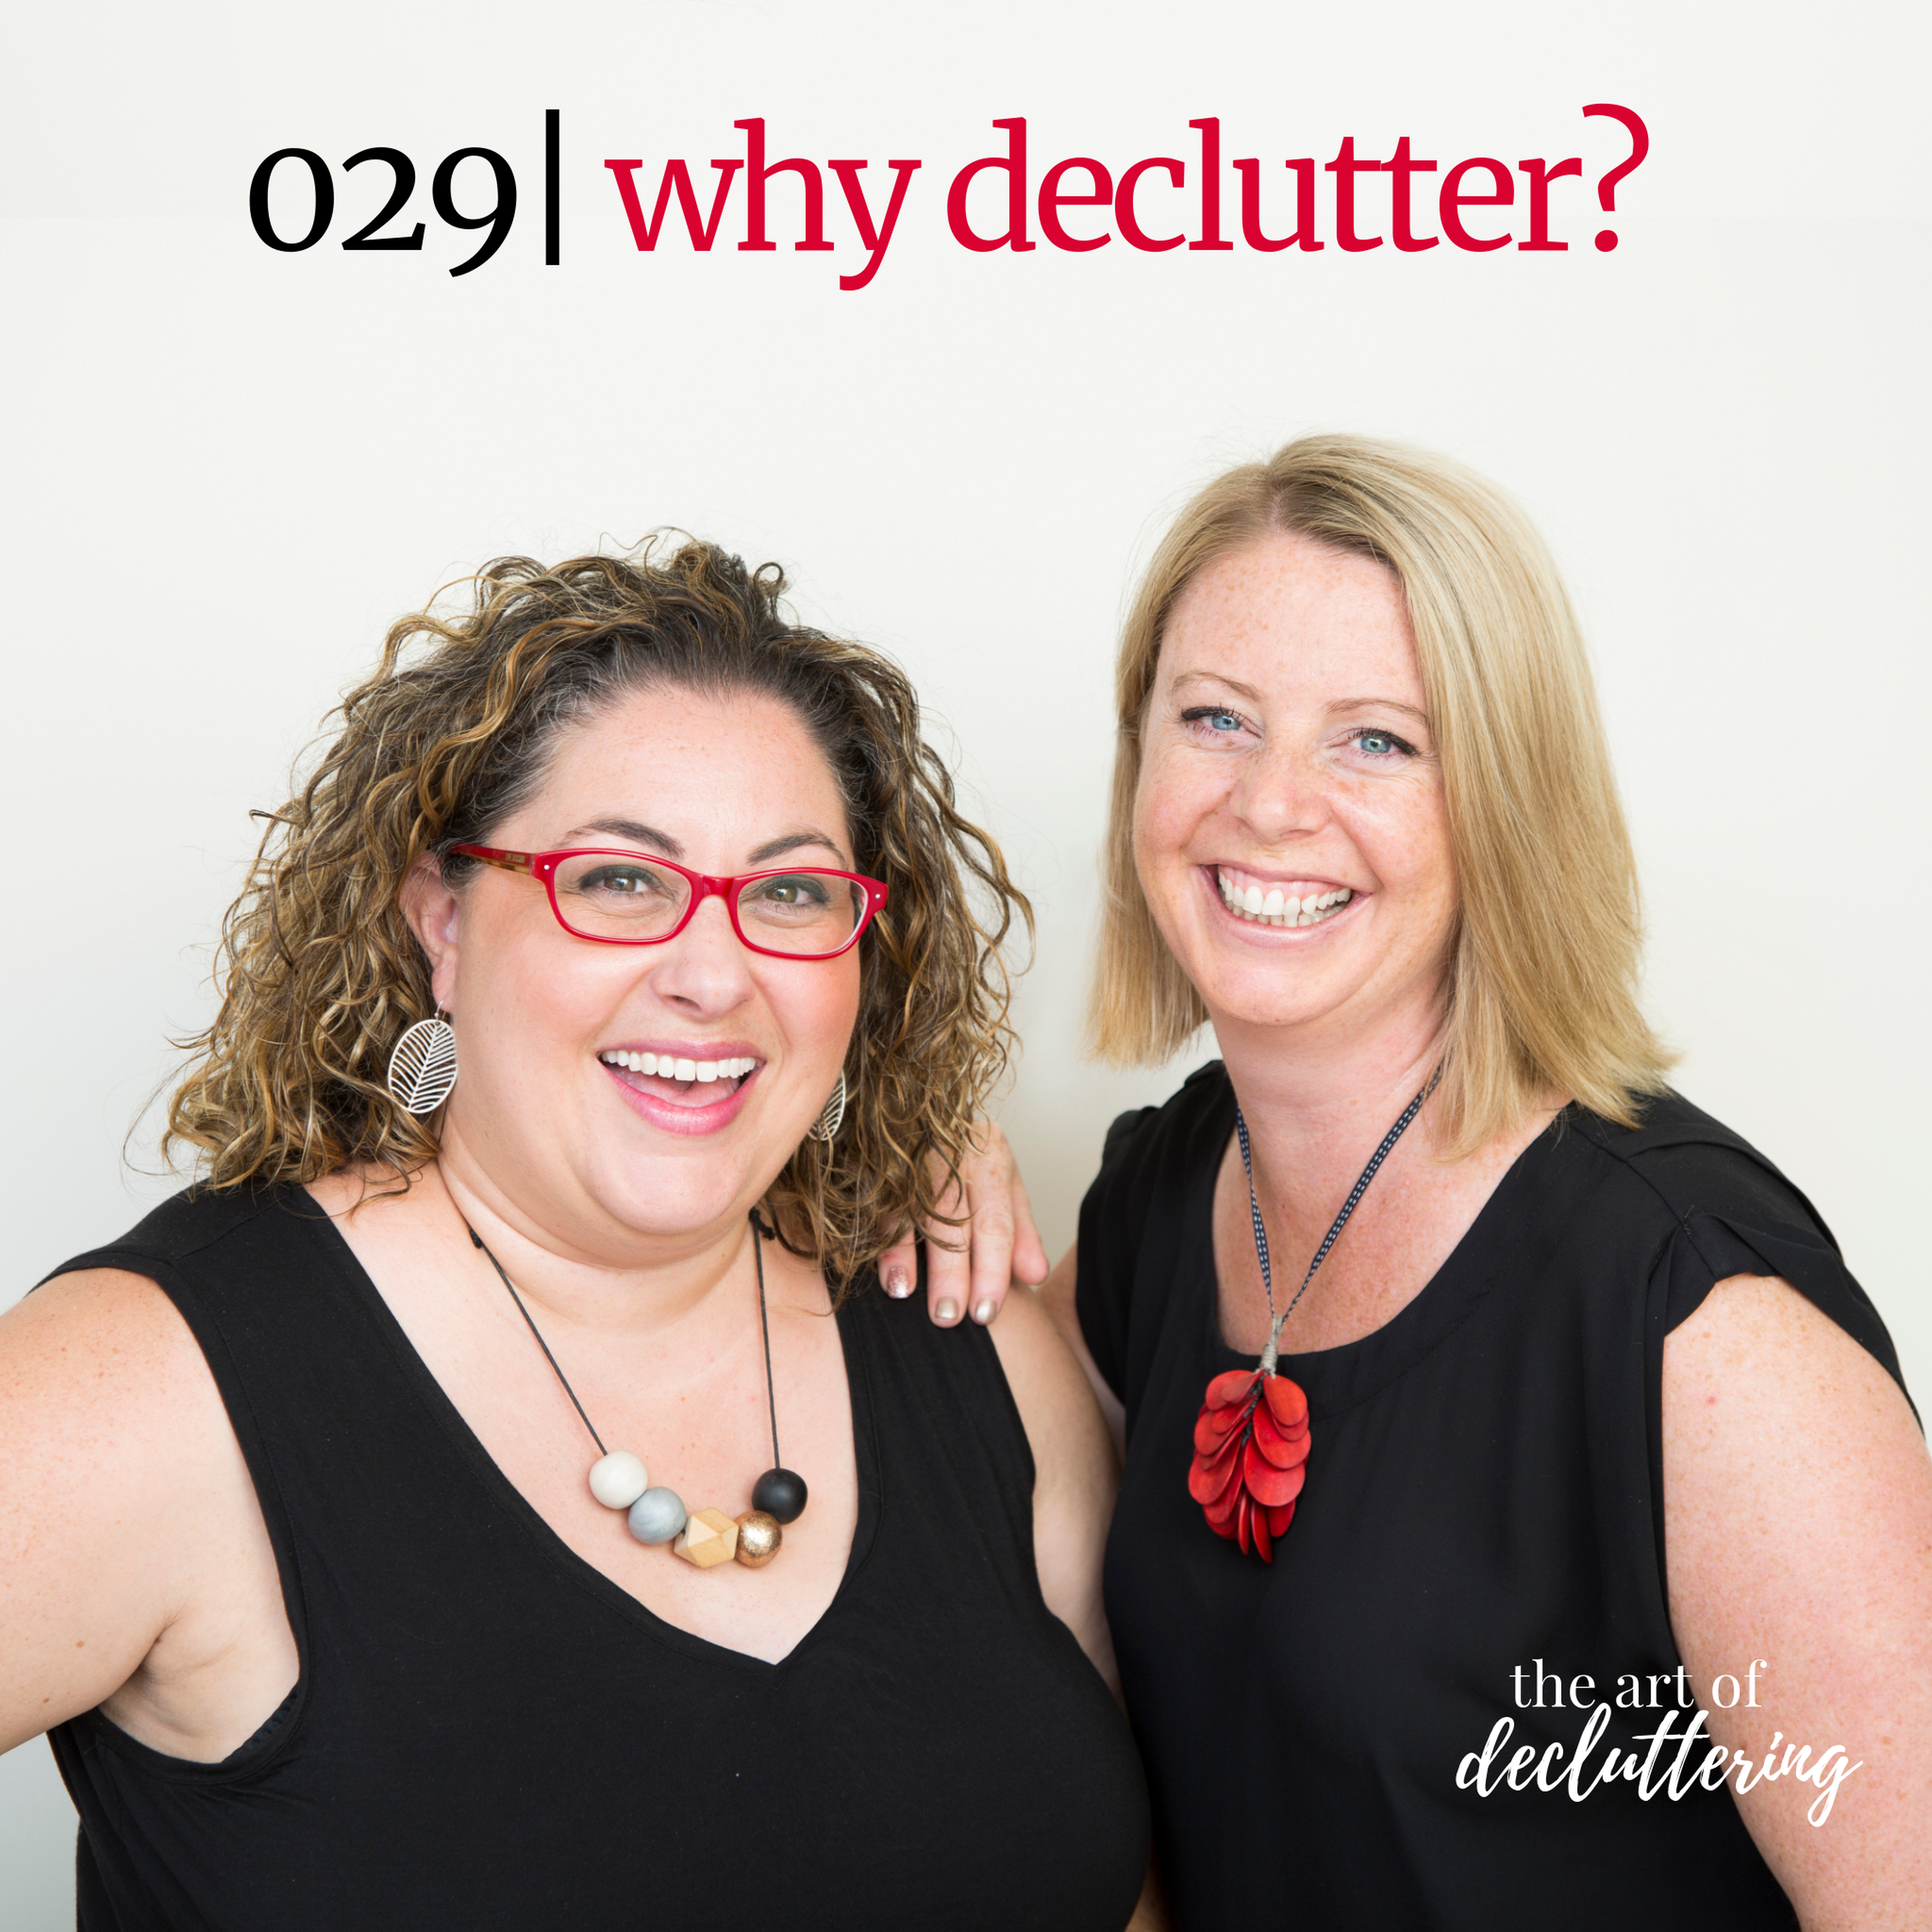 Why Declutter?